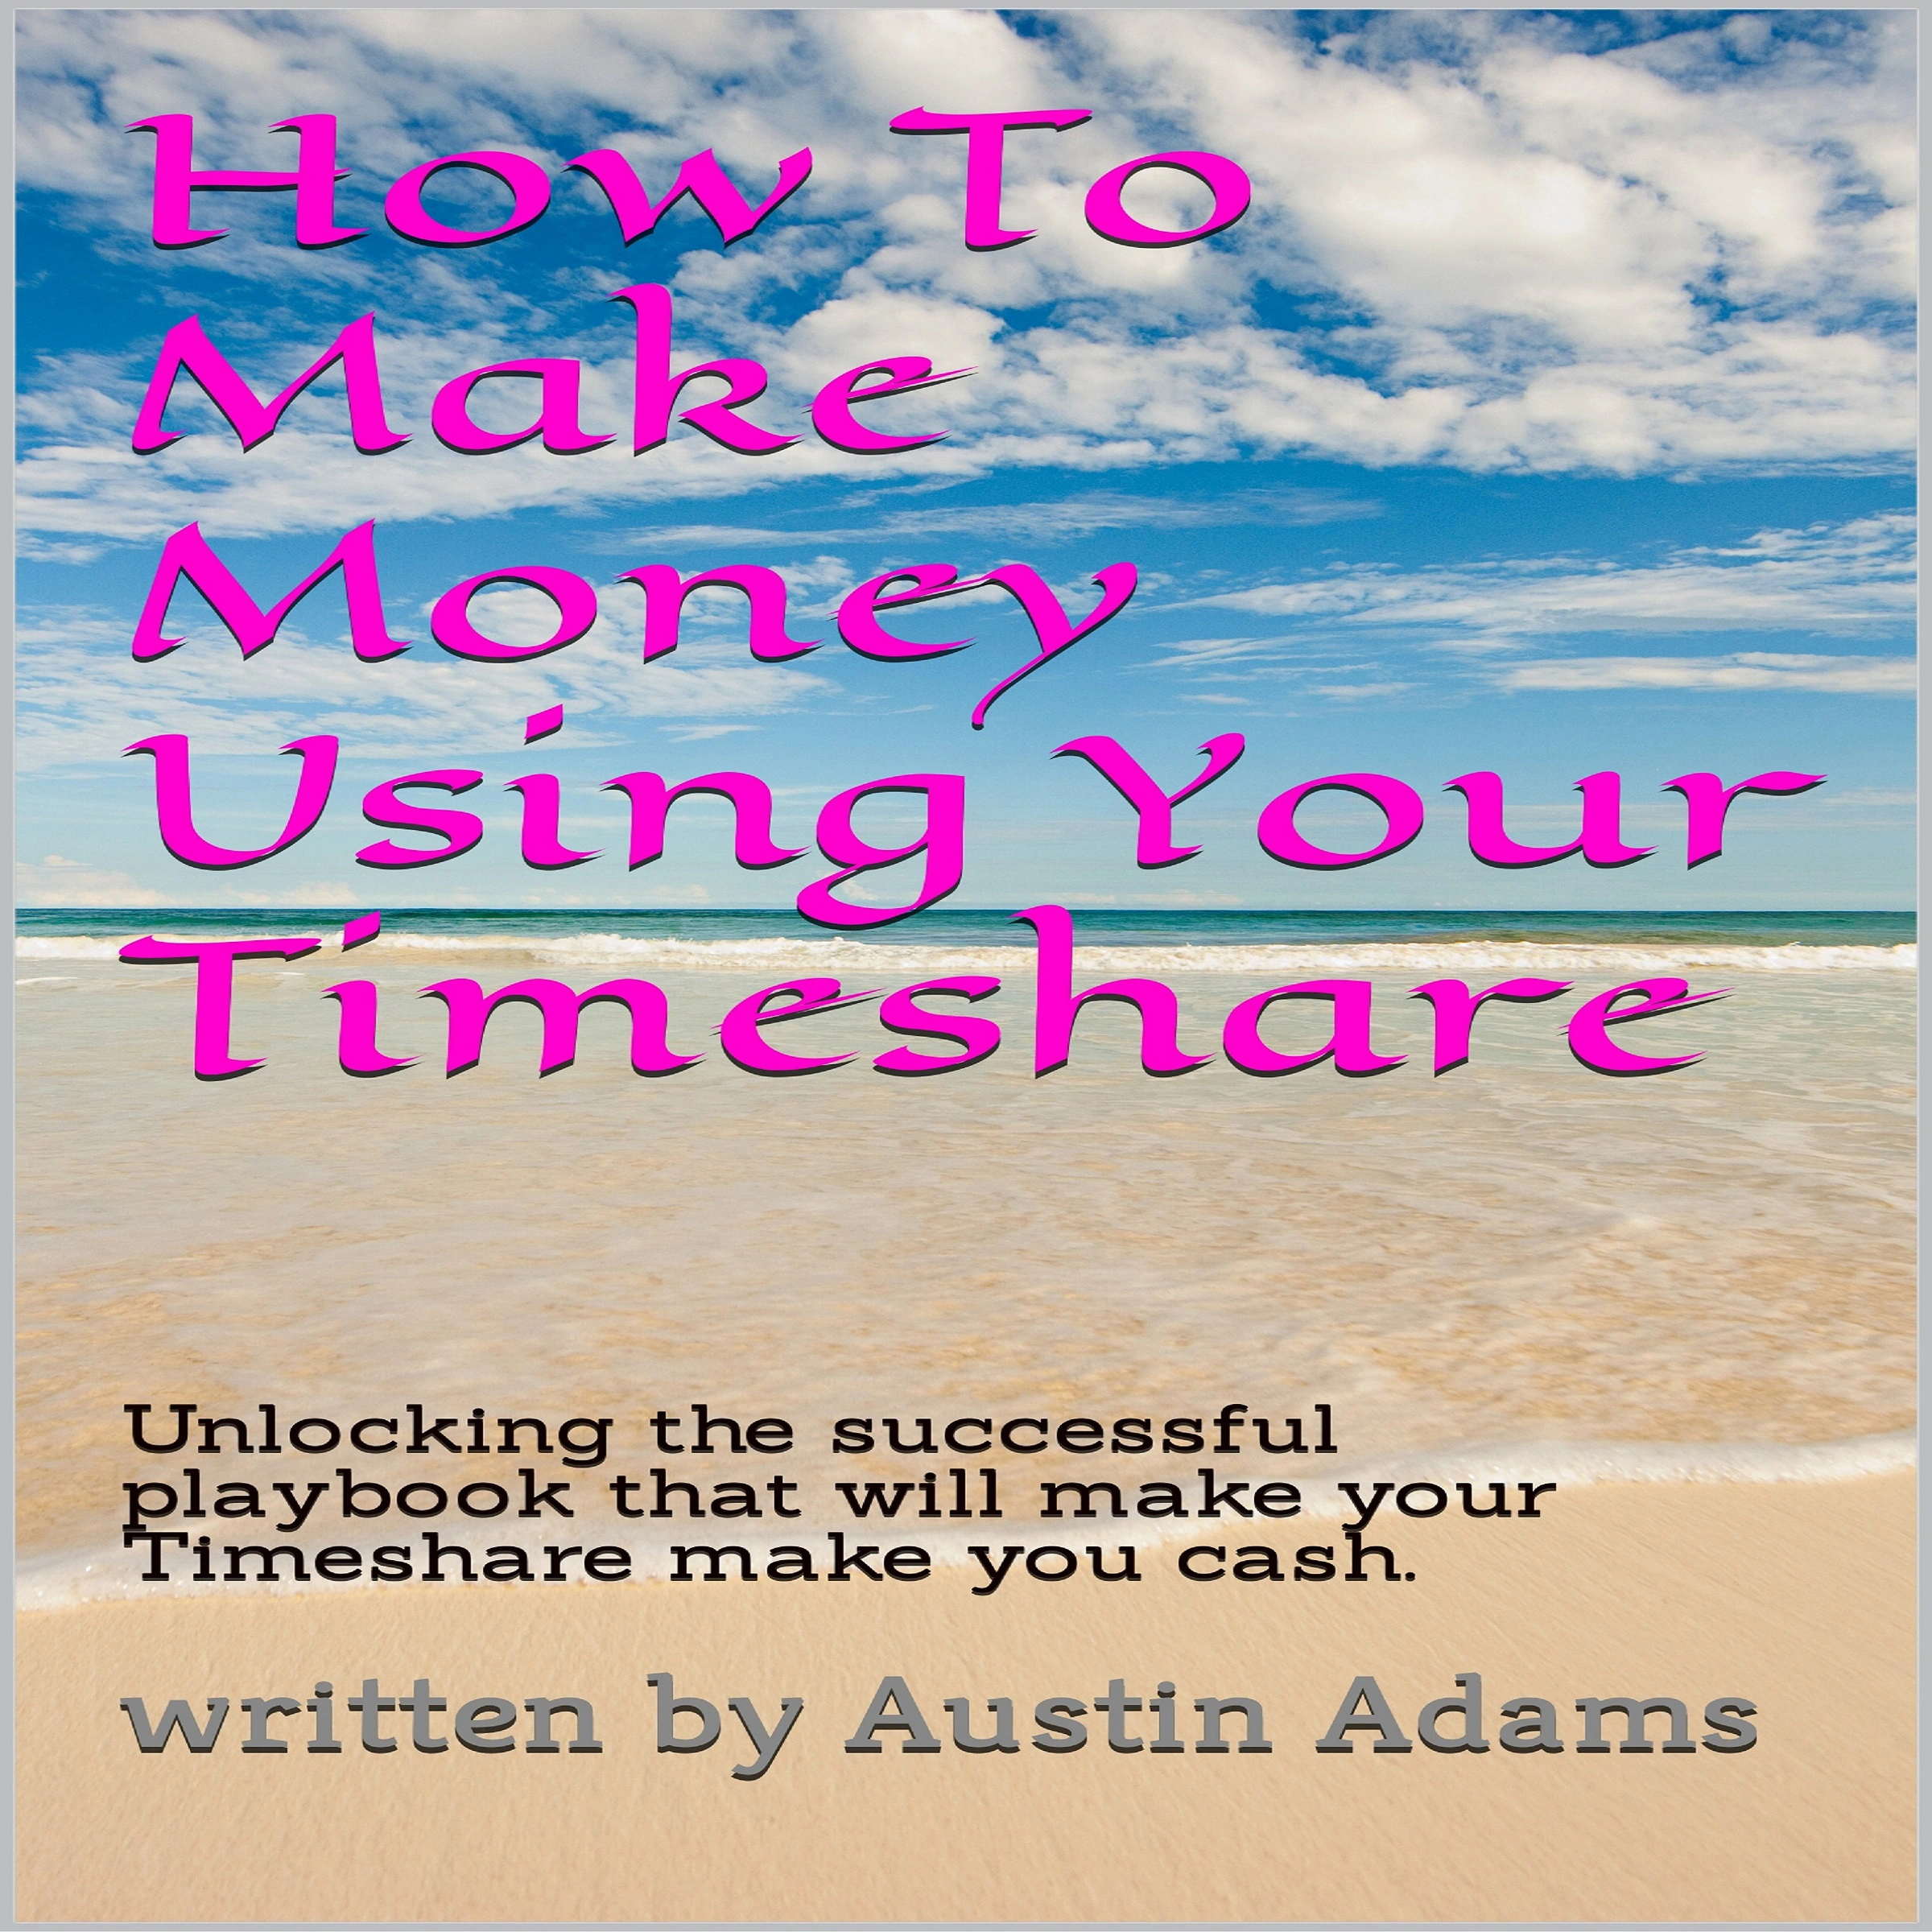 How To Make Money Using Your Timeshare by Austin Adams Audiobook